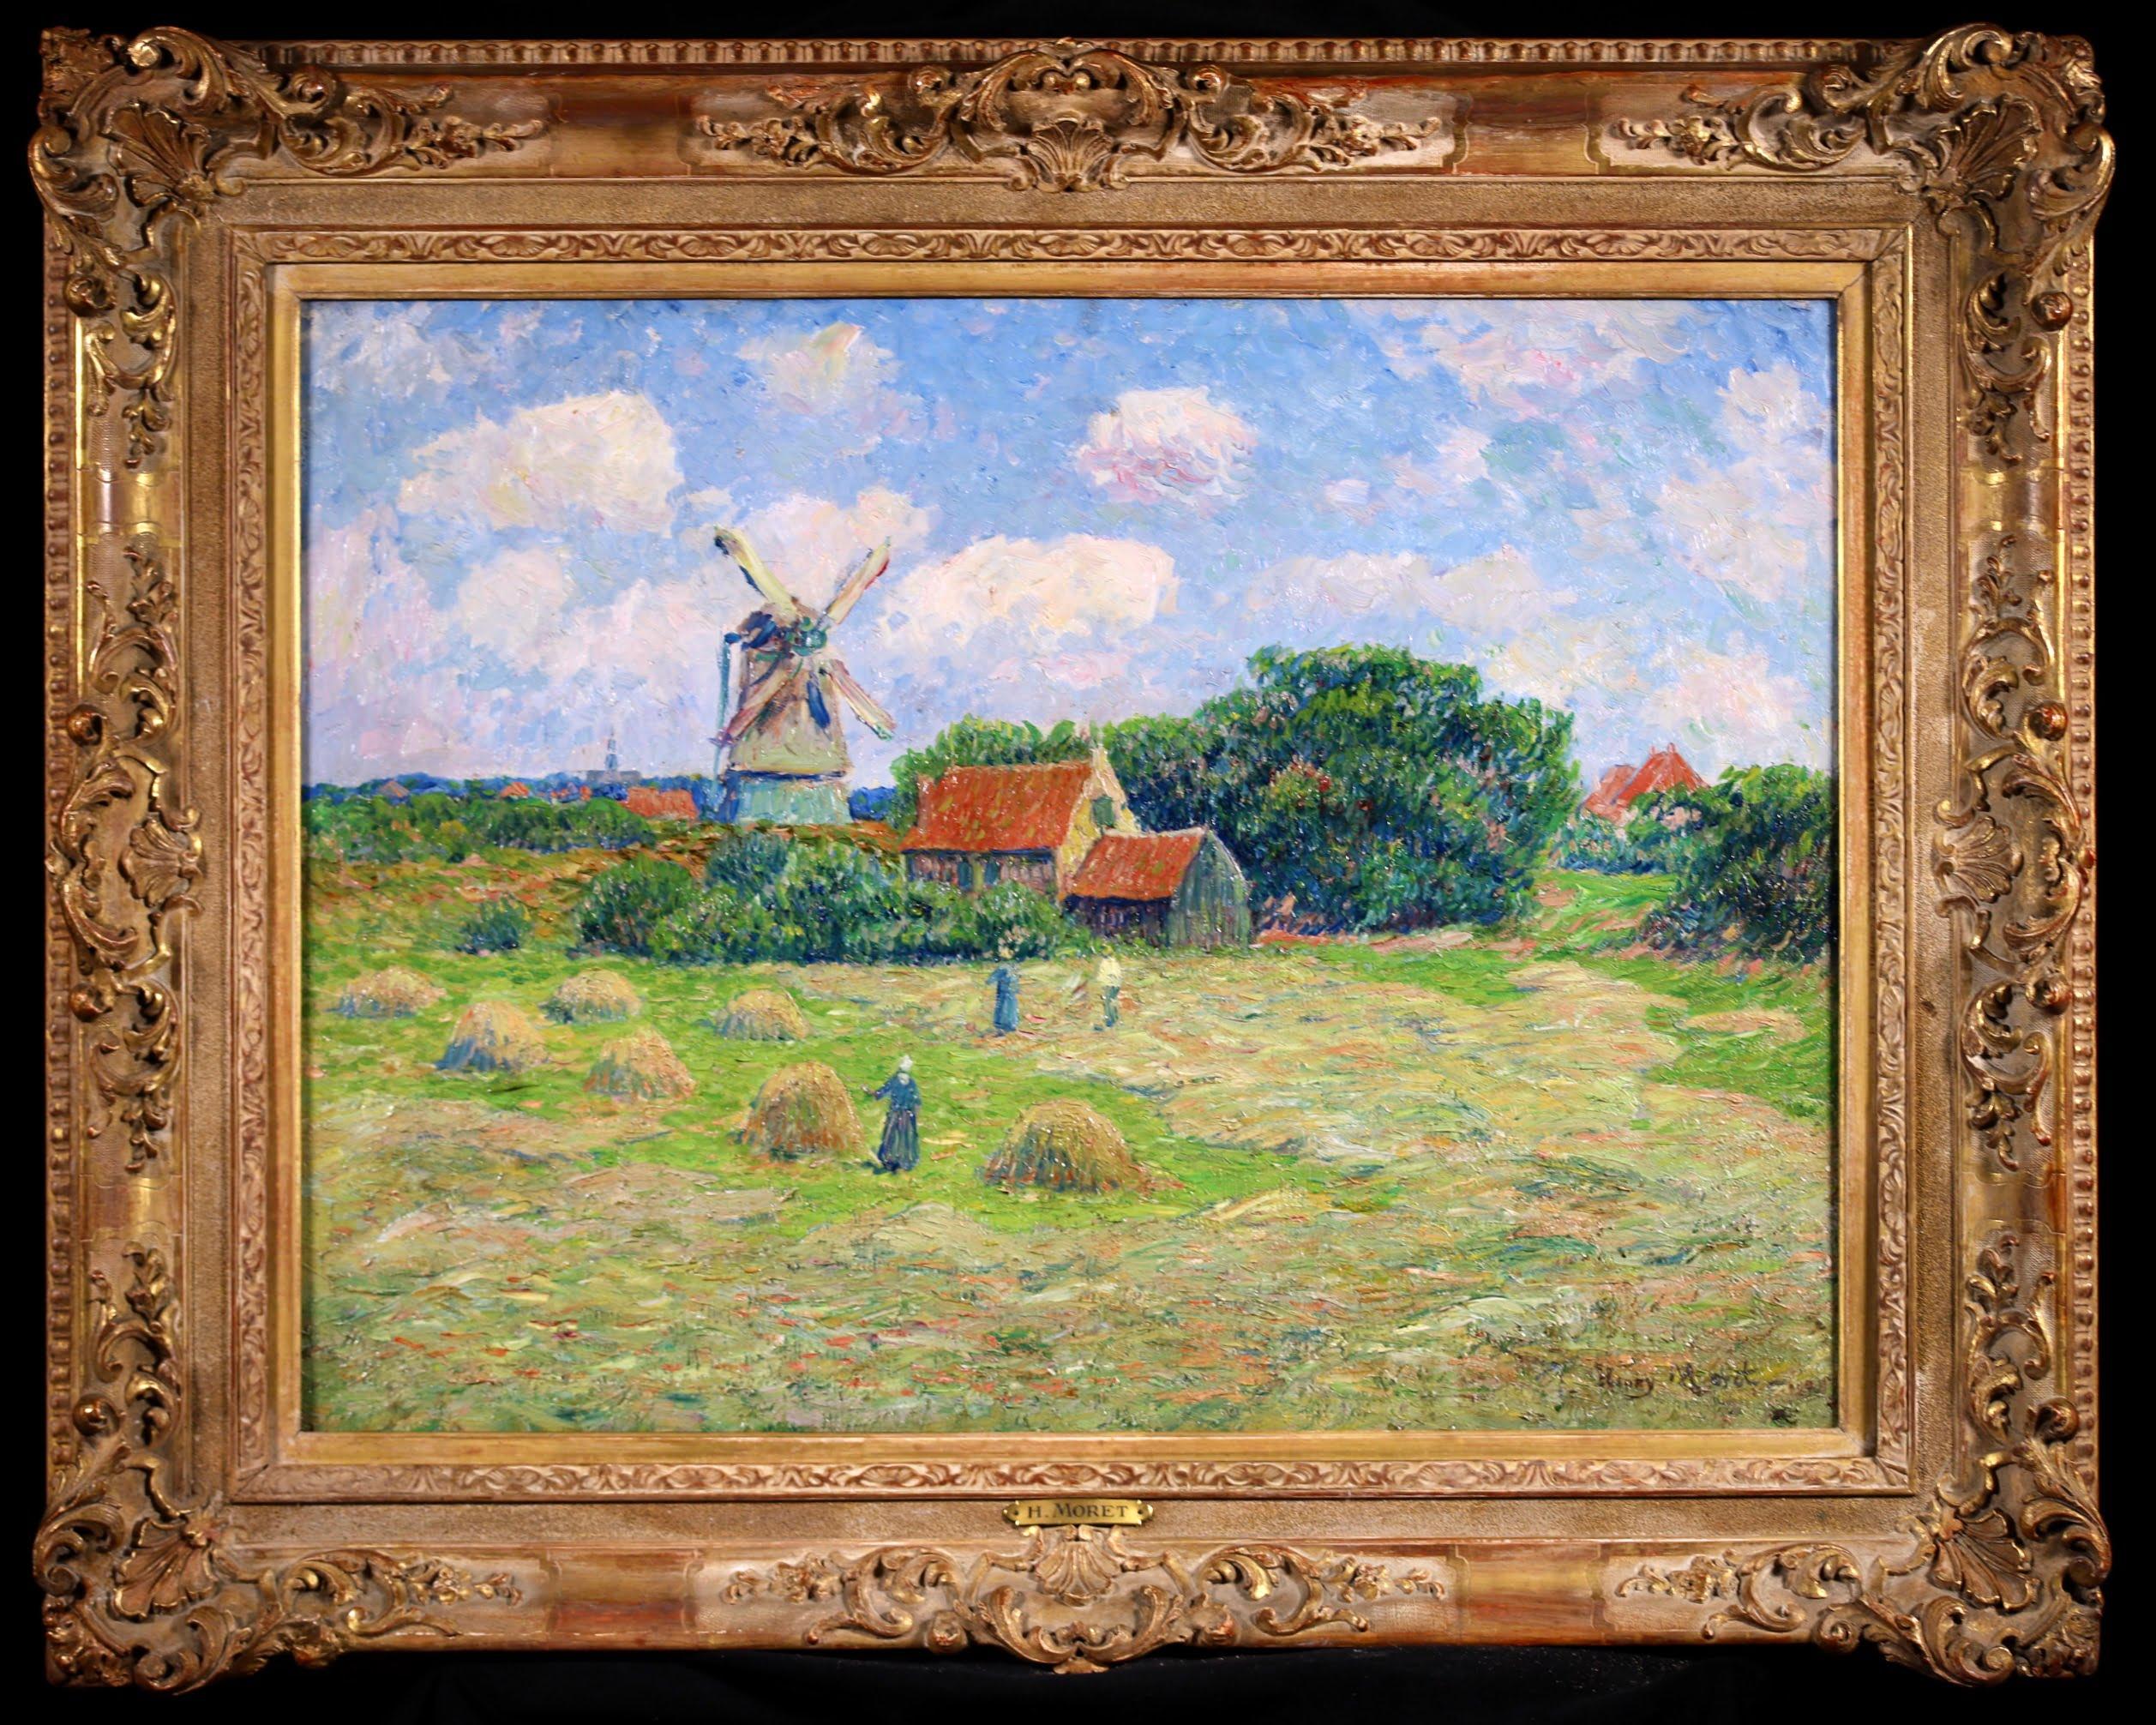 Signed oil on canvas landscape by French impressionist painter Henry Moret. The work depicts a view of workers harvesting on a farm in the village of Egmond aan Zee in the Netherlands. It is a bright summer's day and white clouds roll through the